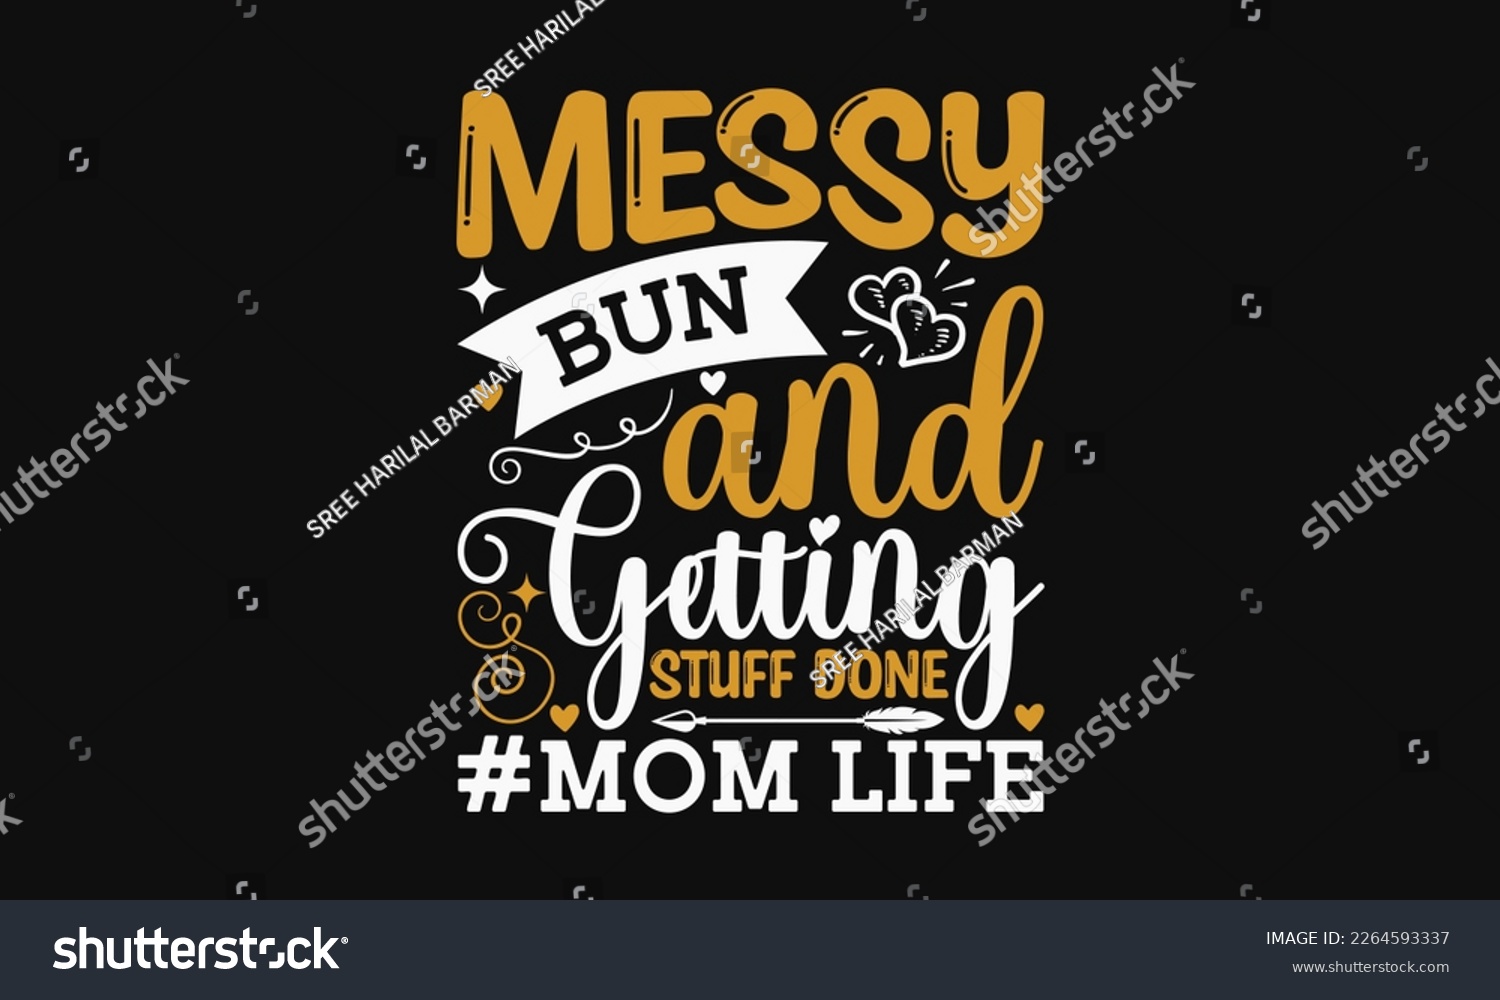 SVG of Messy bun and getting stuff done - Mother's Day Svg t-shirt design. Hand Drawn Lettering Phrases, Calligraphy T-Shirt Design, Ornate Background, Handwritten Vector, Eps 10. svg